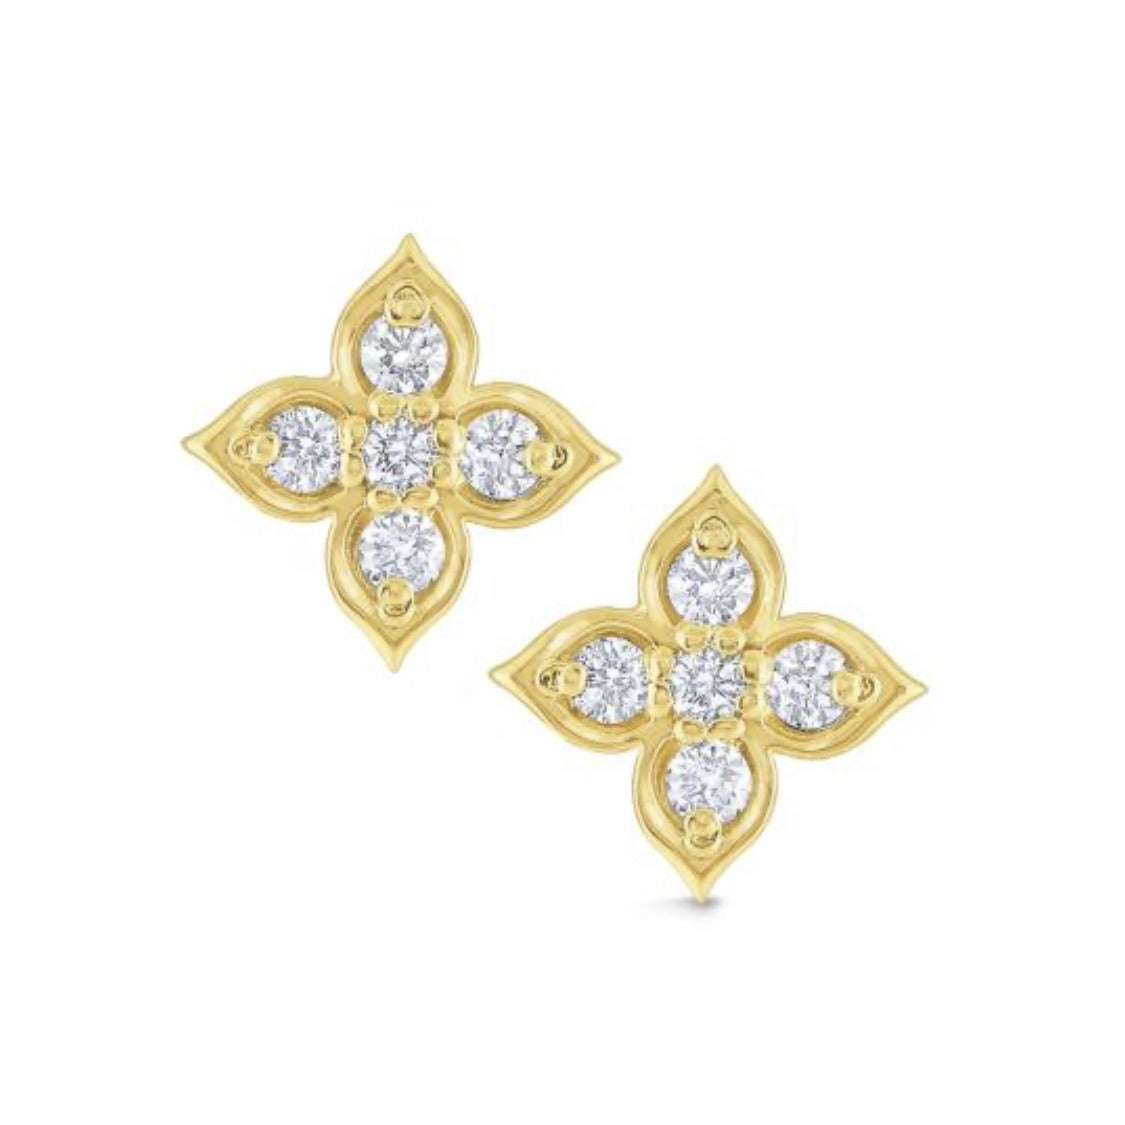 14k Gold and Diamond Floral Stud Earrings